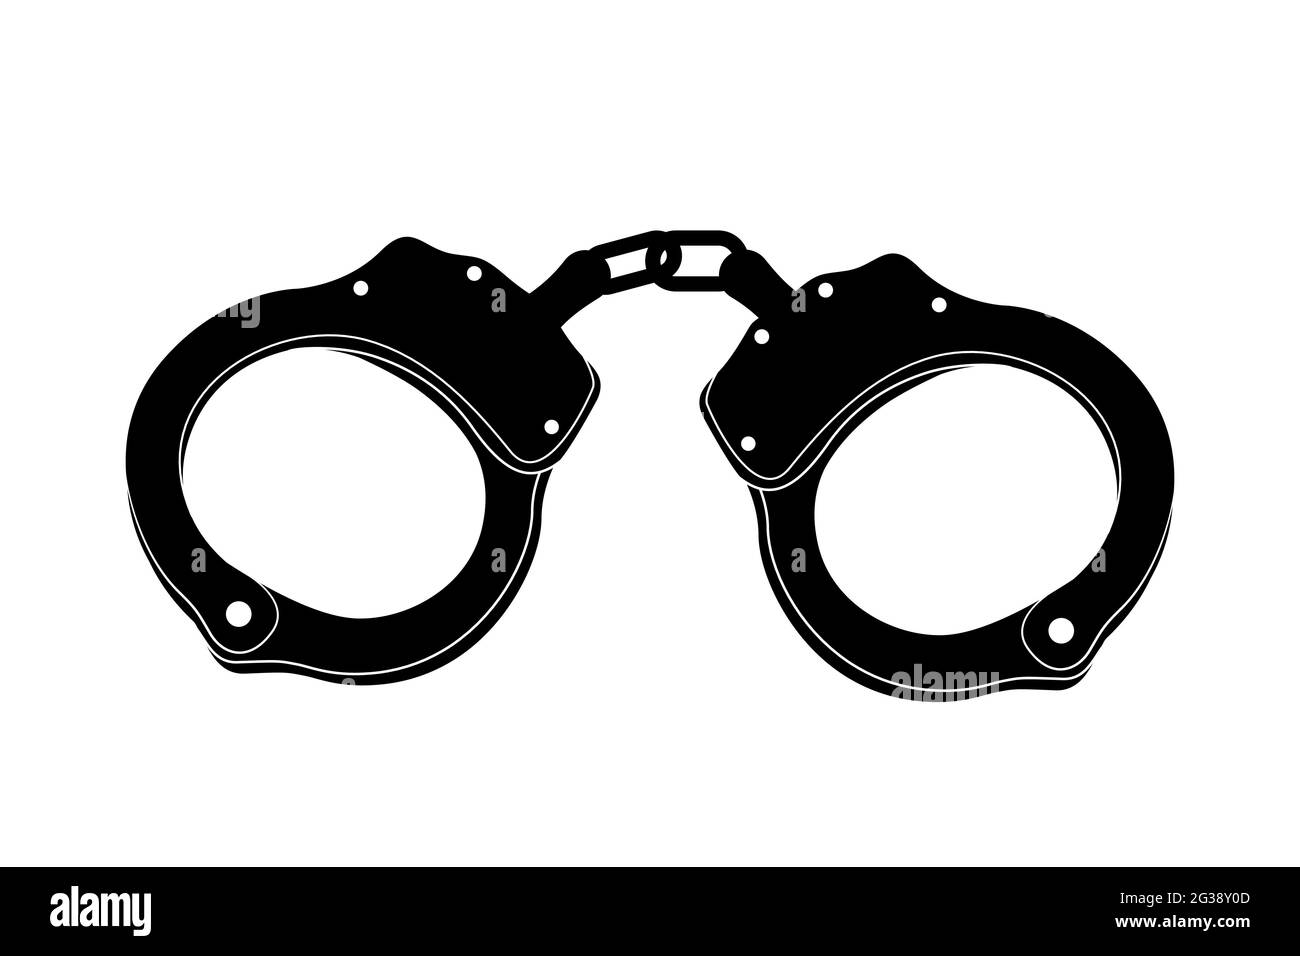 Hand cuffs on white background. Illustration icon, peerless closed linked police handcuffs. Black and white color. Stock Vector